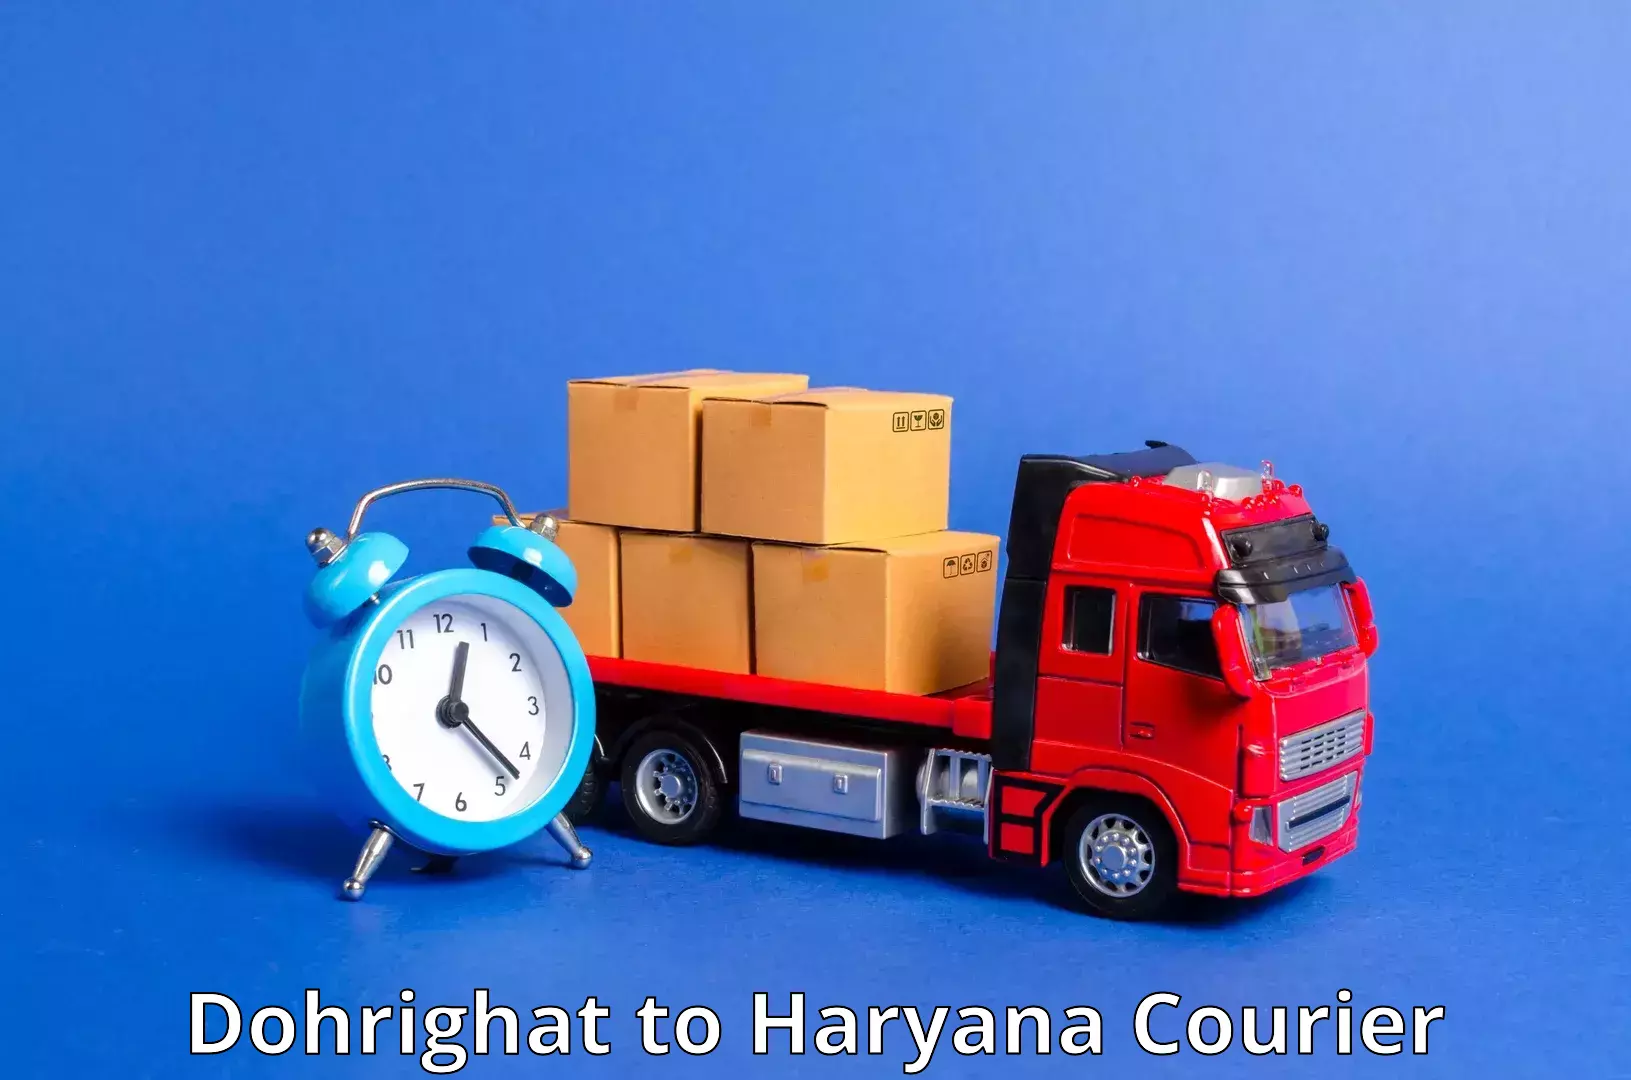 High-speed parcel service in Dohrighat to Chaudhary Charan Singh Haryana Agricultural University Hisar